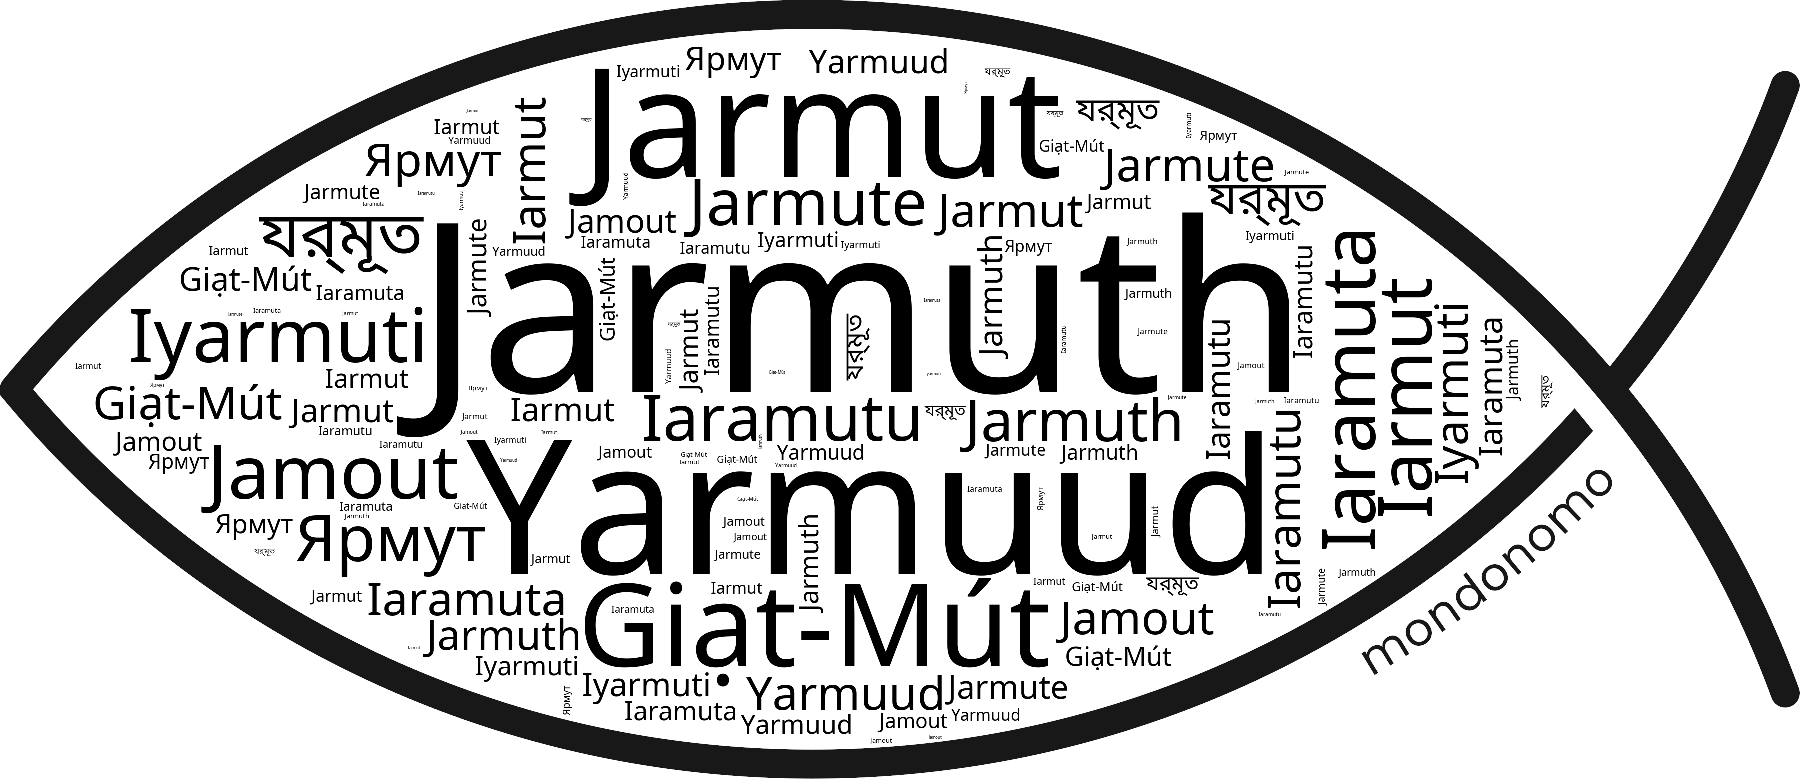 Name Jarmuth in the world's Bibles